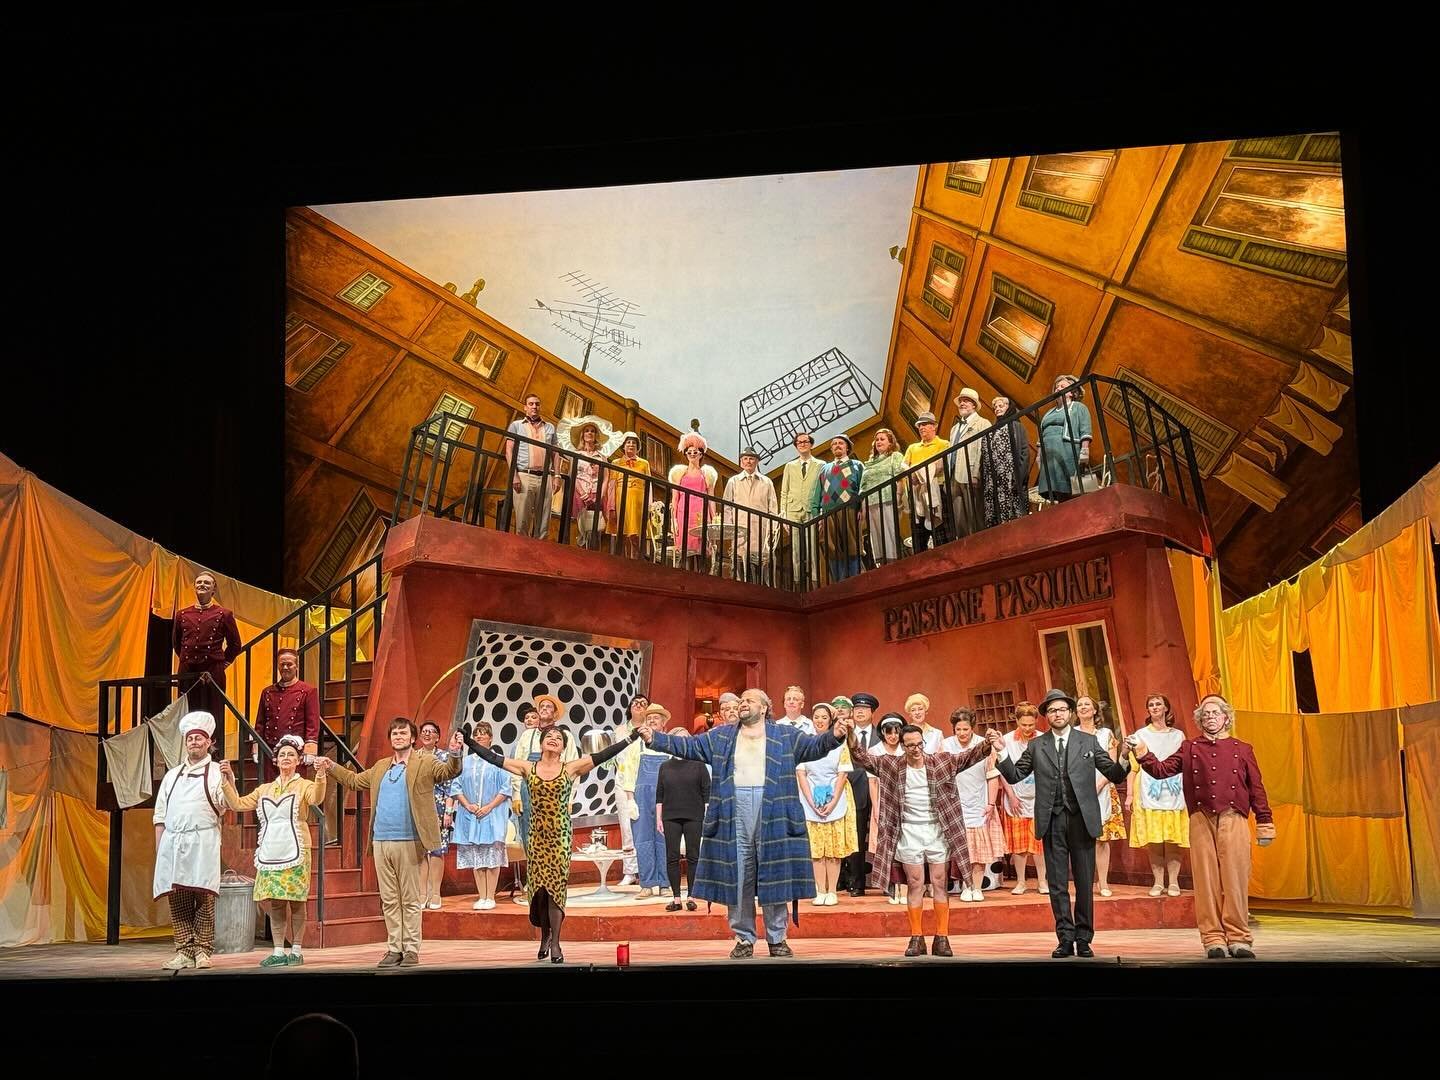 Bravi tutti to the cast and crew of this very funny production of Don Pasquale, which opened last night at @canadianopera! 

I am very excited to see this production once again on May 14 for a special one-night-only Ensemble Studio performance! Ticke